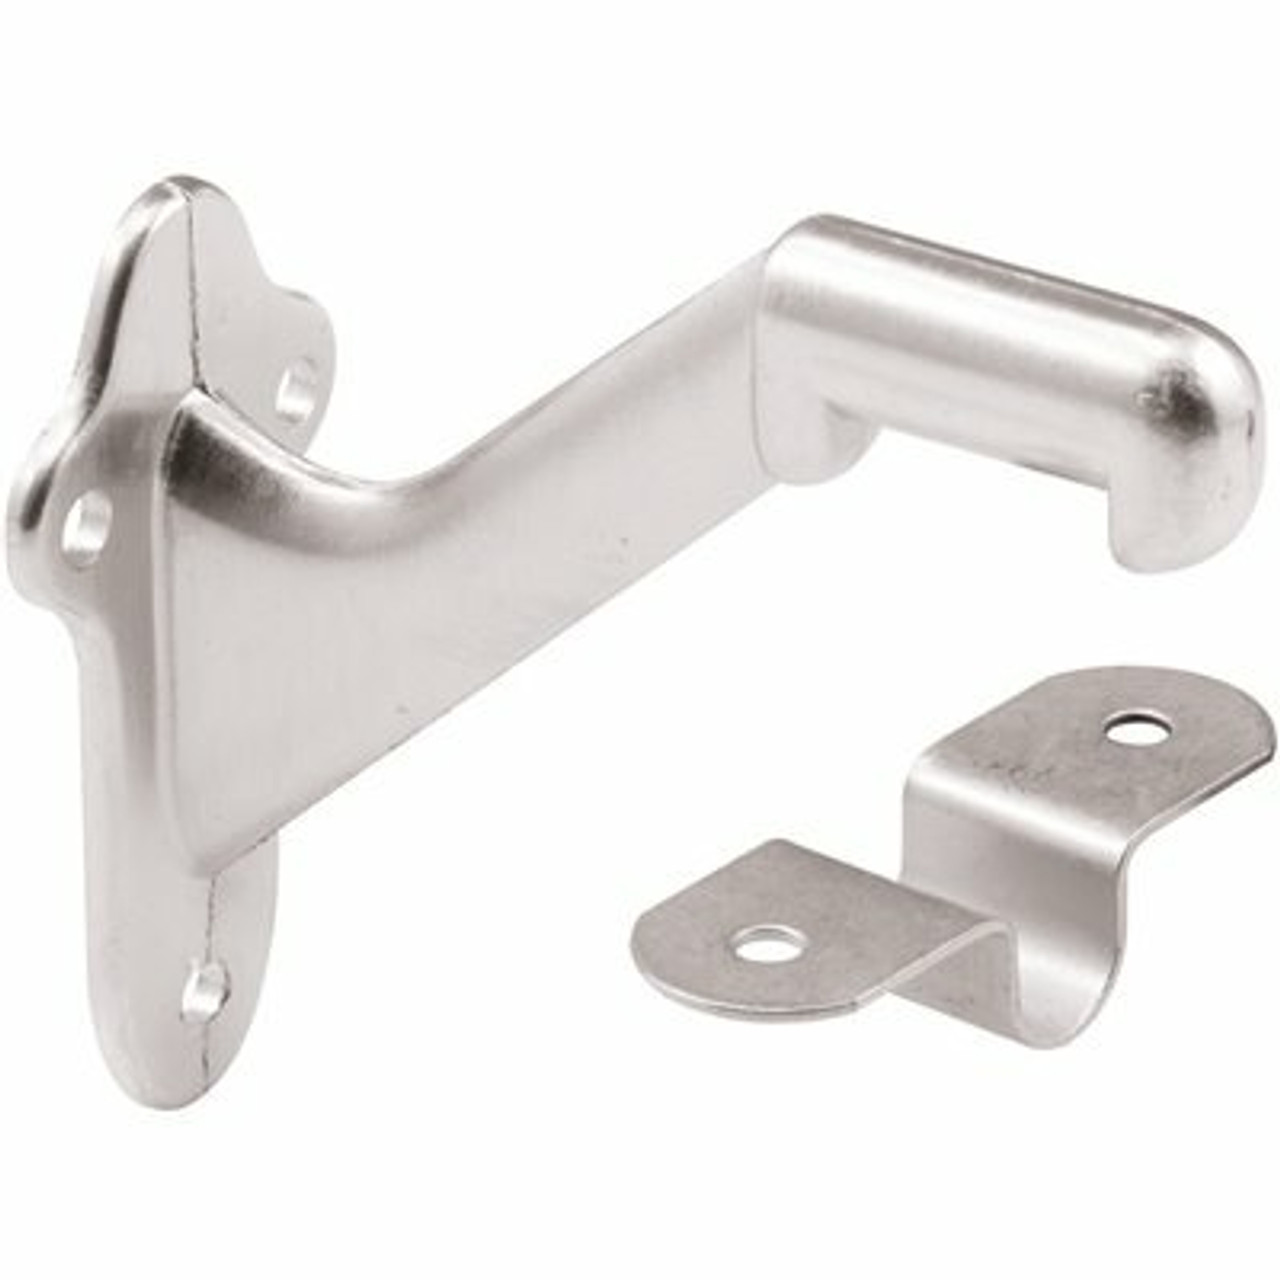 Prime-Line Staircase Handrail Support Bracket, Diecast Zinc Construction, Satin Chrome-Plated, 2 Sets